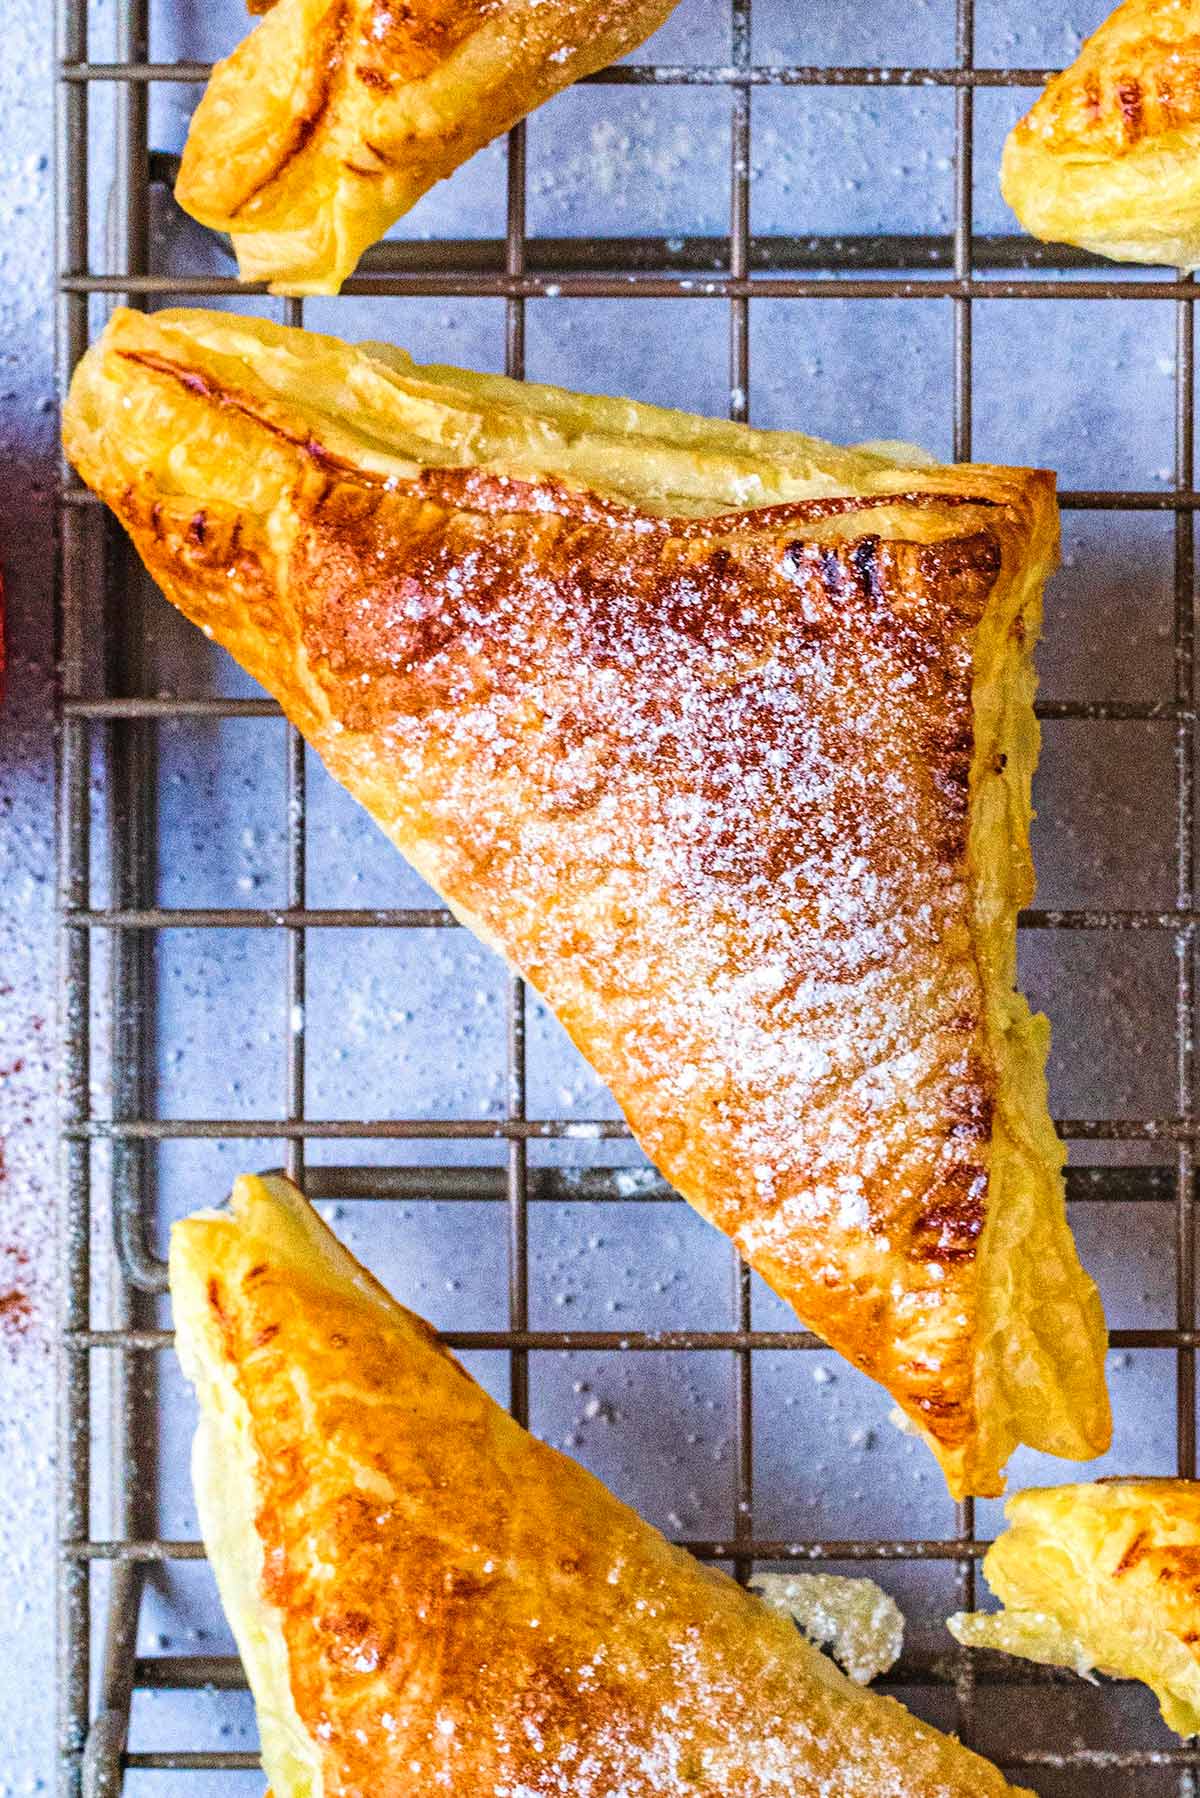 An apple turnover dusted with icing sugar.